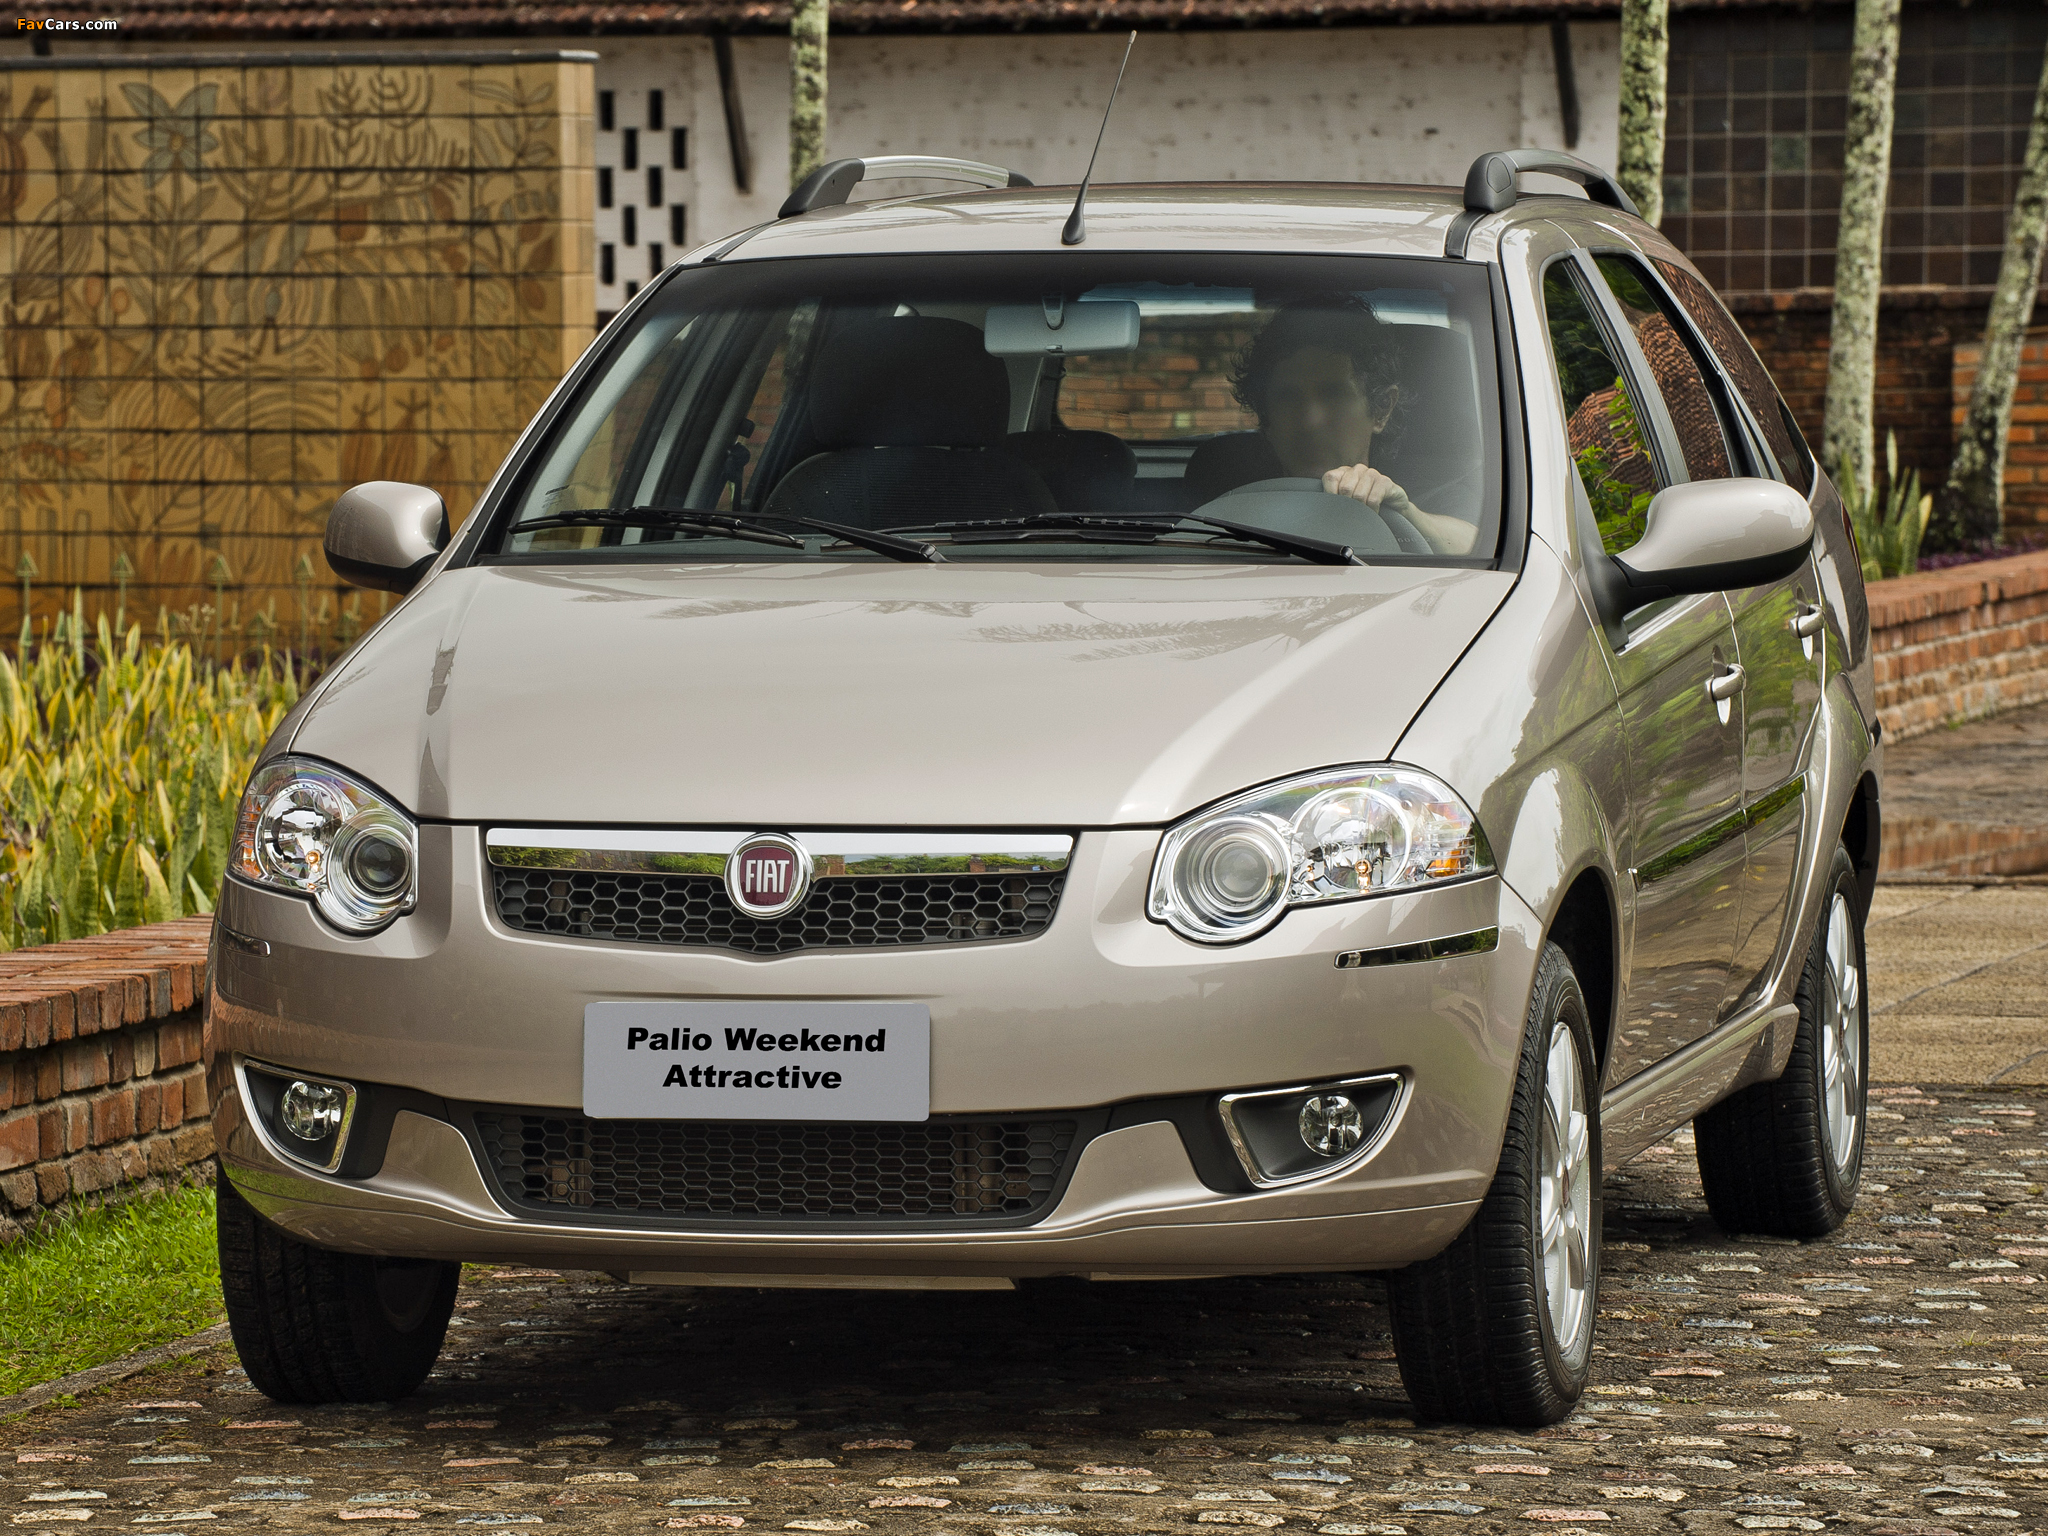 Fiat Palio Weekend (178) 2012 pictures (2048 x 1536)